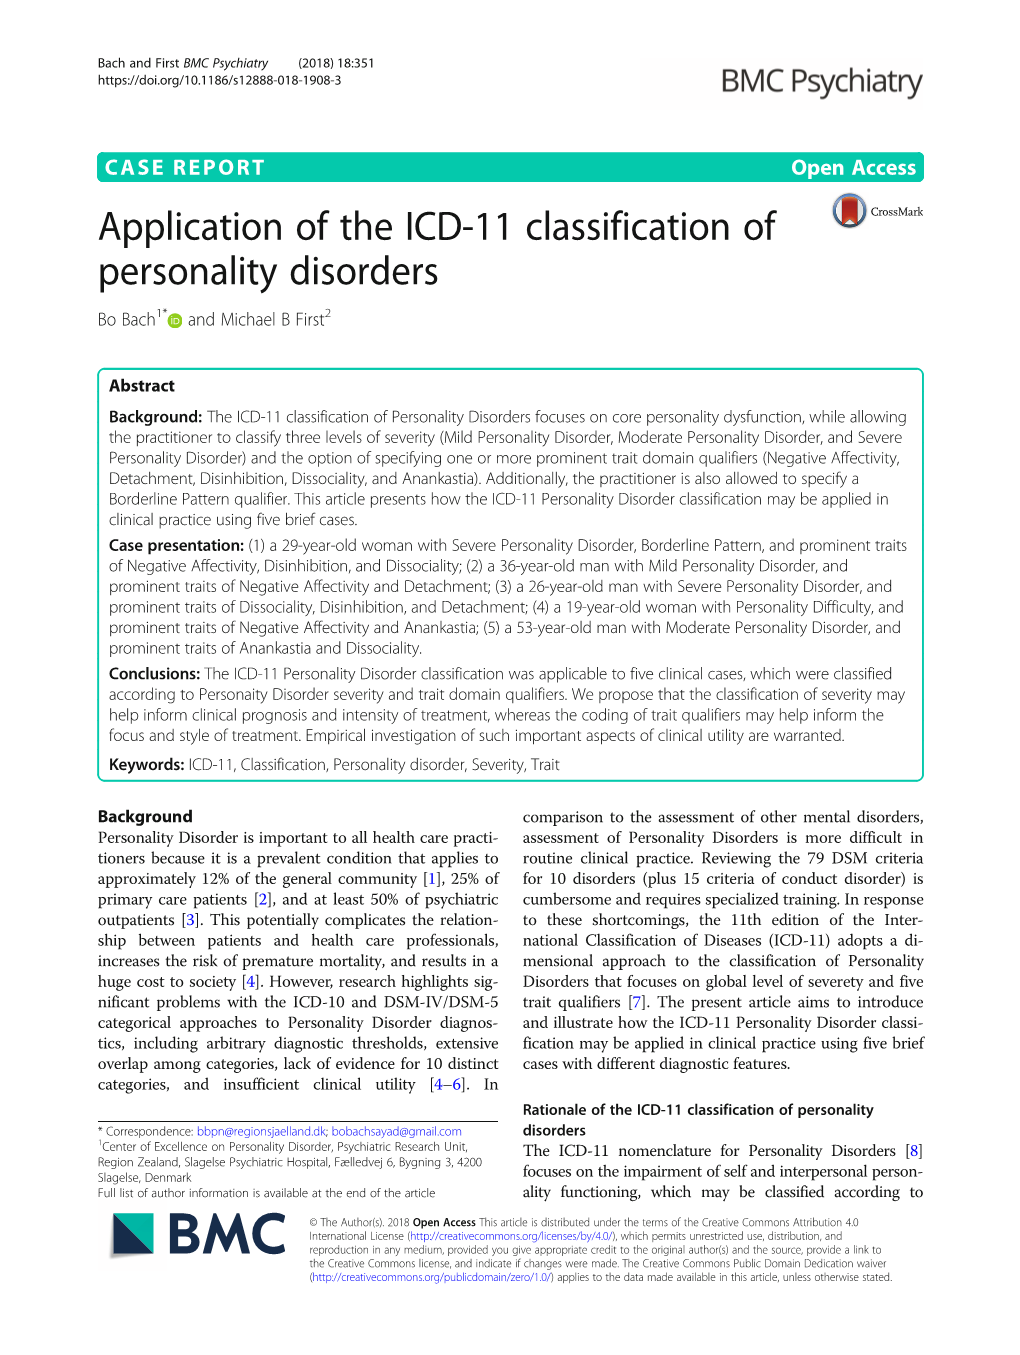 Application of the ICD-11 Classification of Personality Disorders Bo Bach1* and Michael B First2